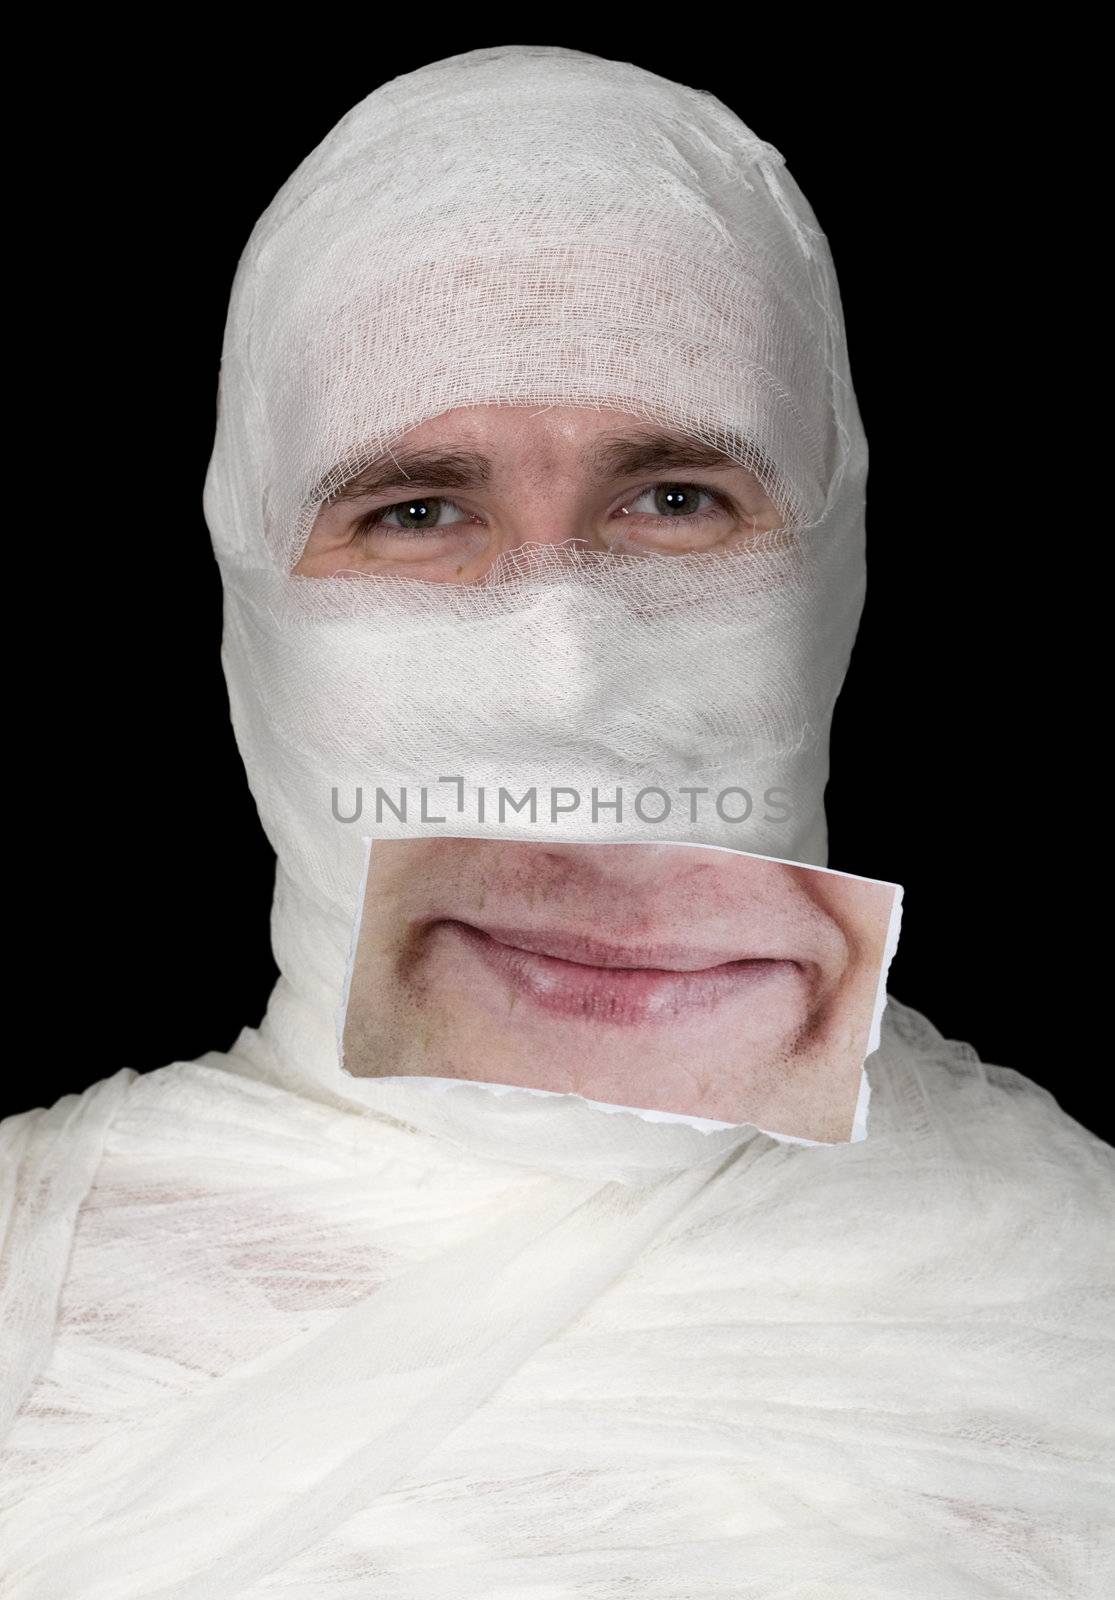 Head of the guy rolled up by bandage with a false smile